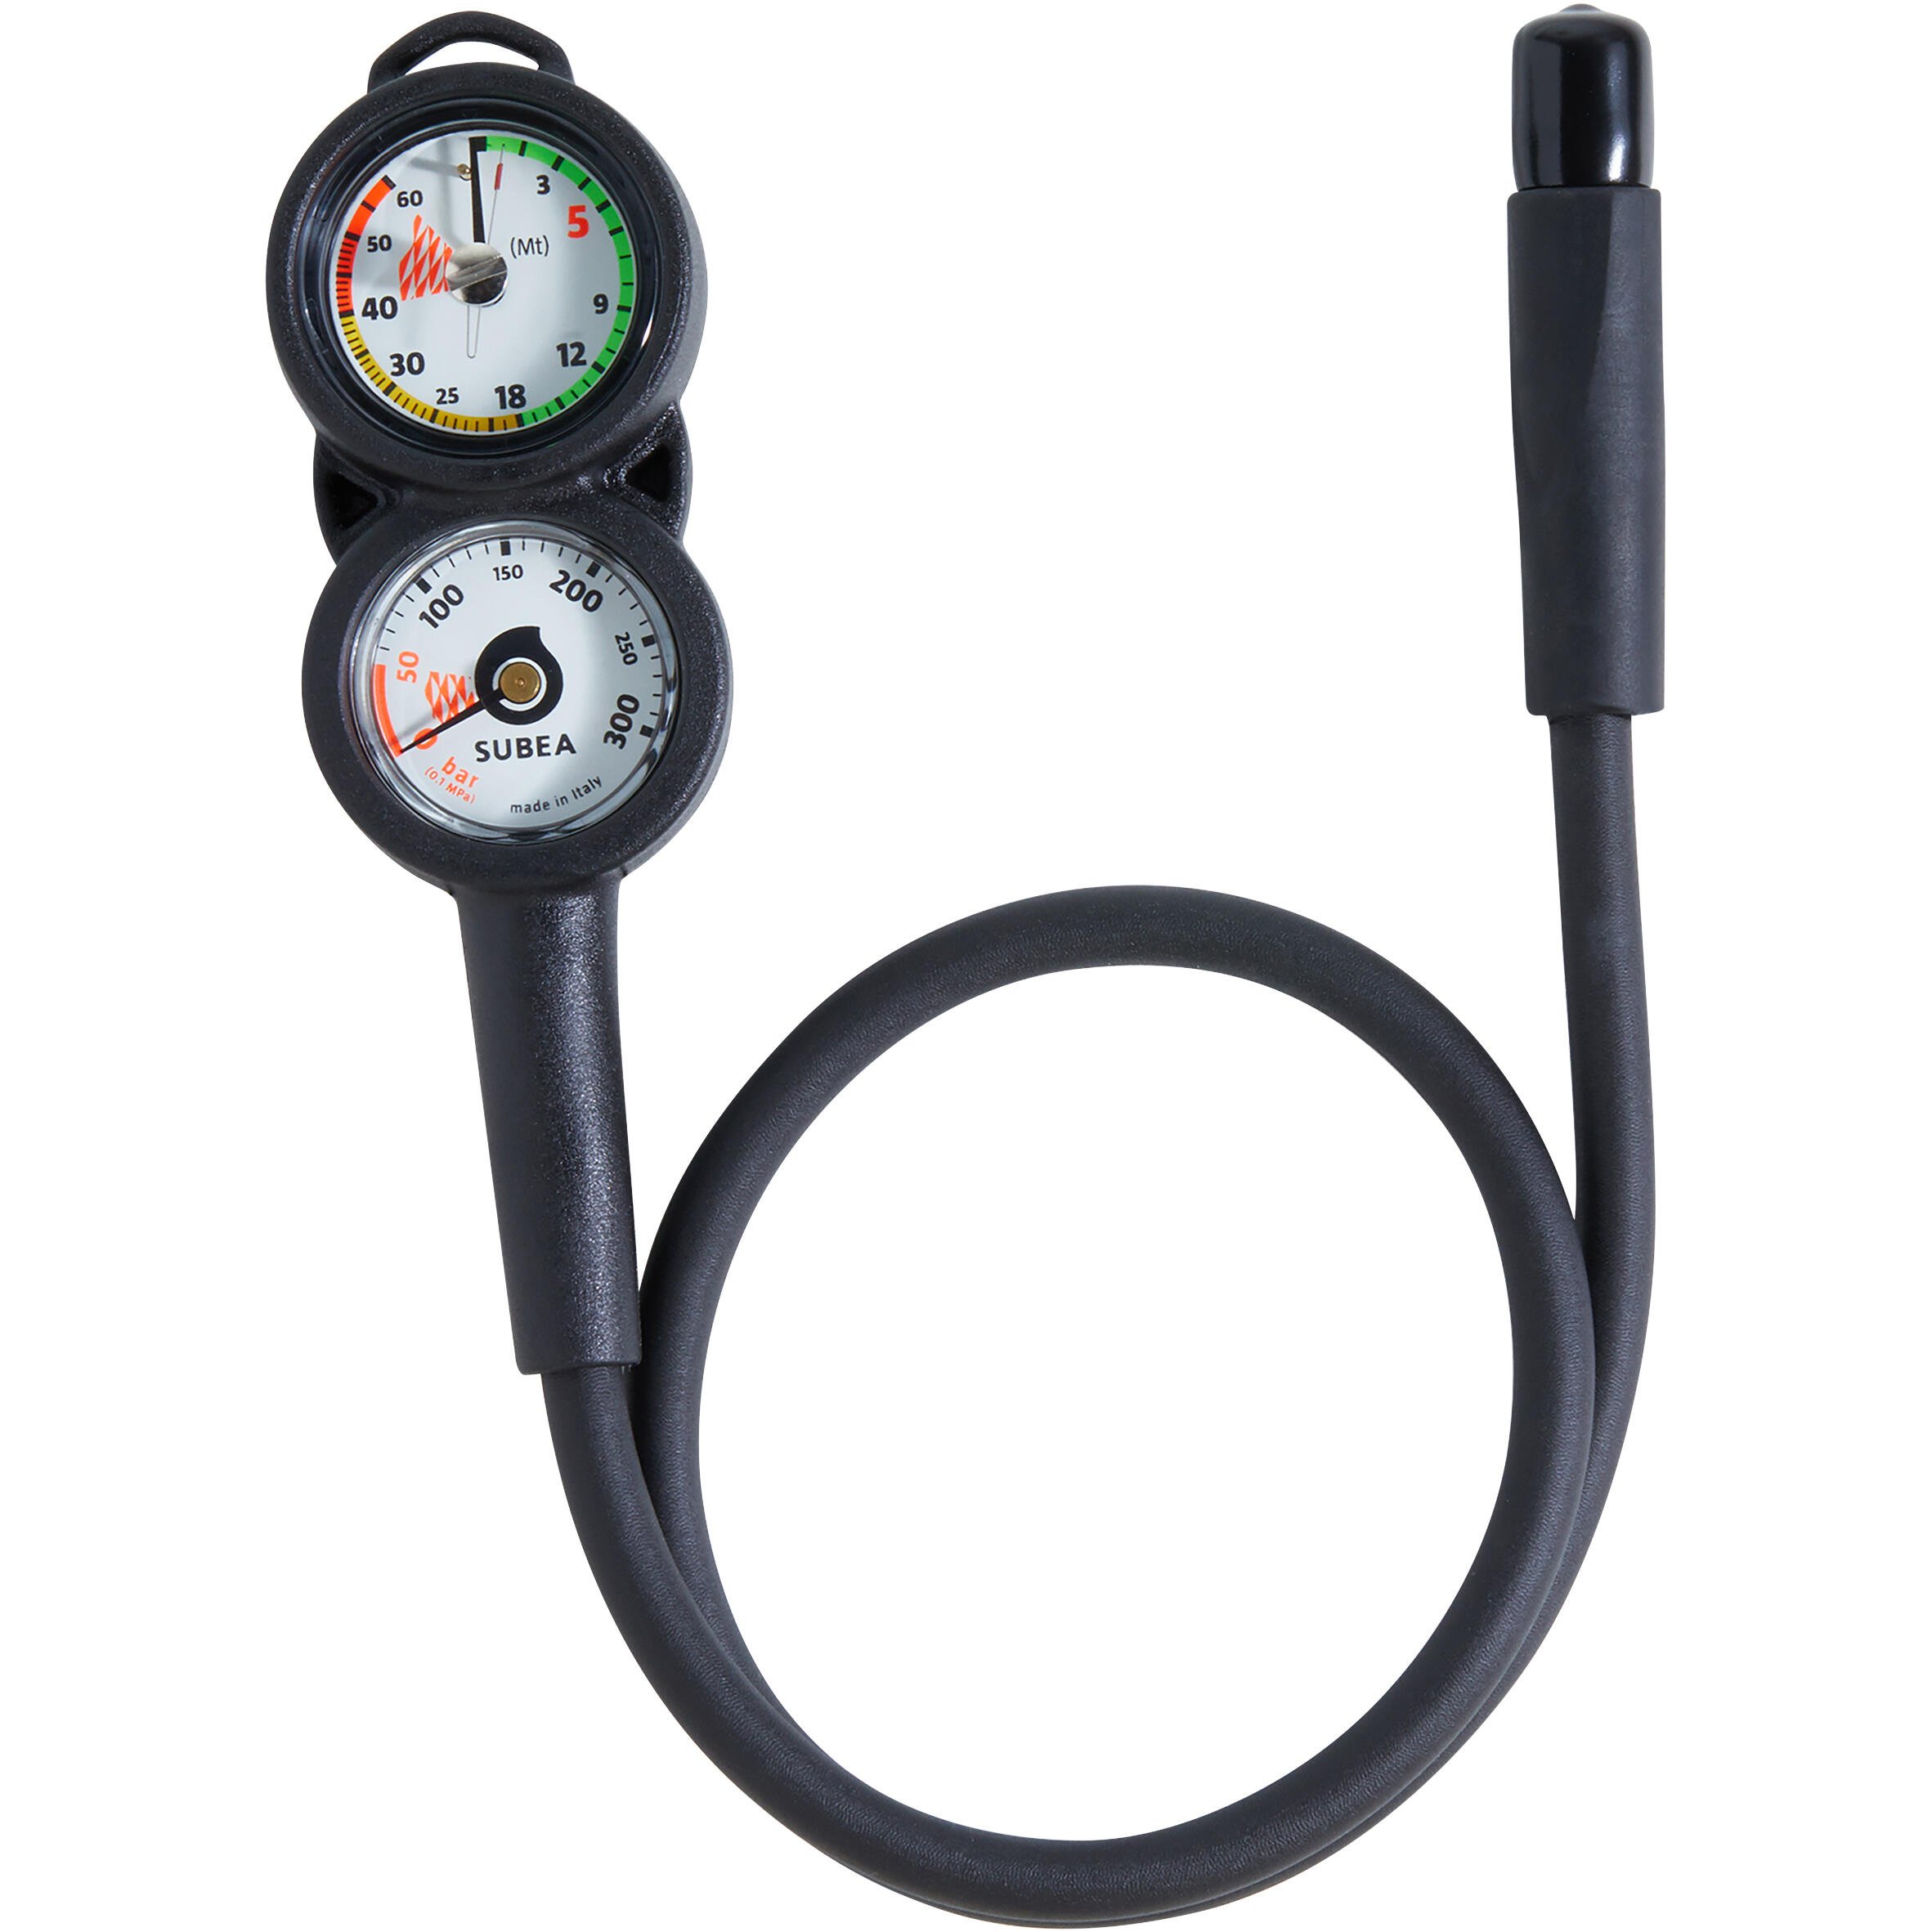 Scuba diving console with 300 bar pressure gauge and depth gauge 1/1